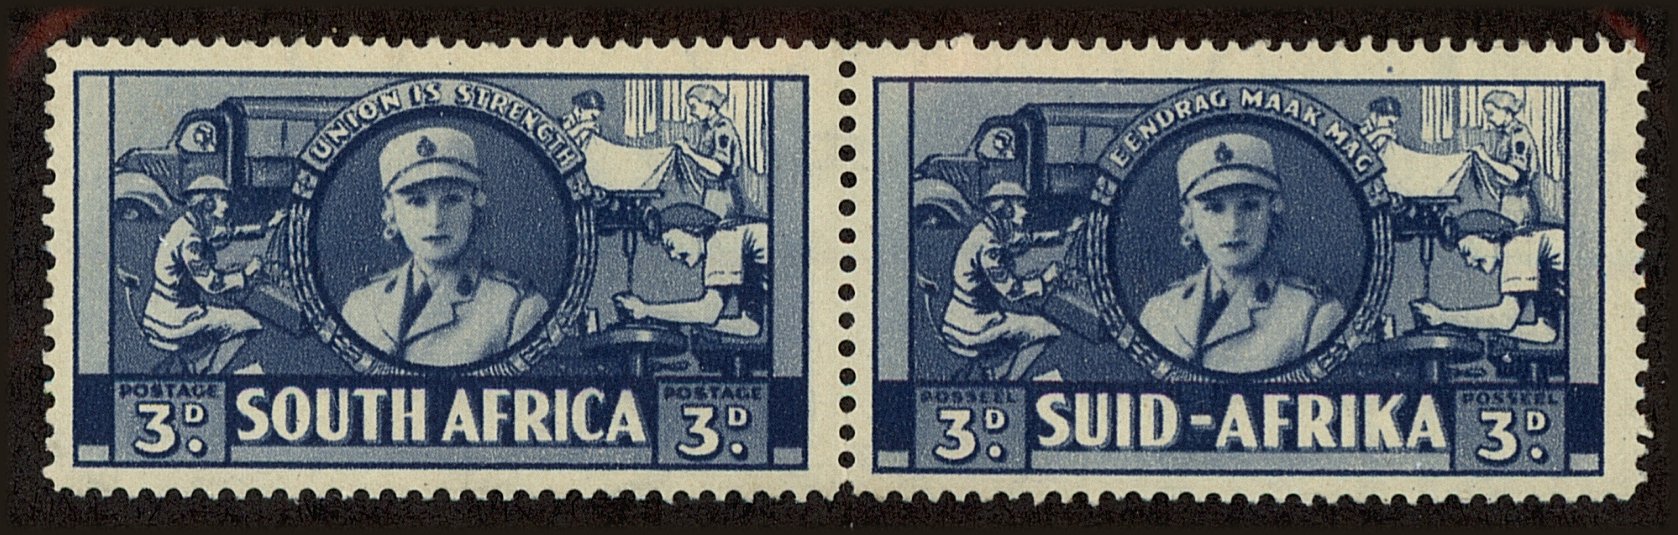 Front view of South Africa 85 collectors stamp